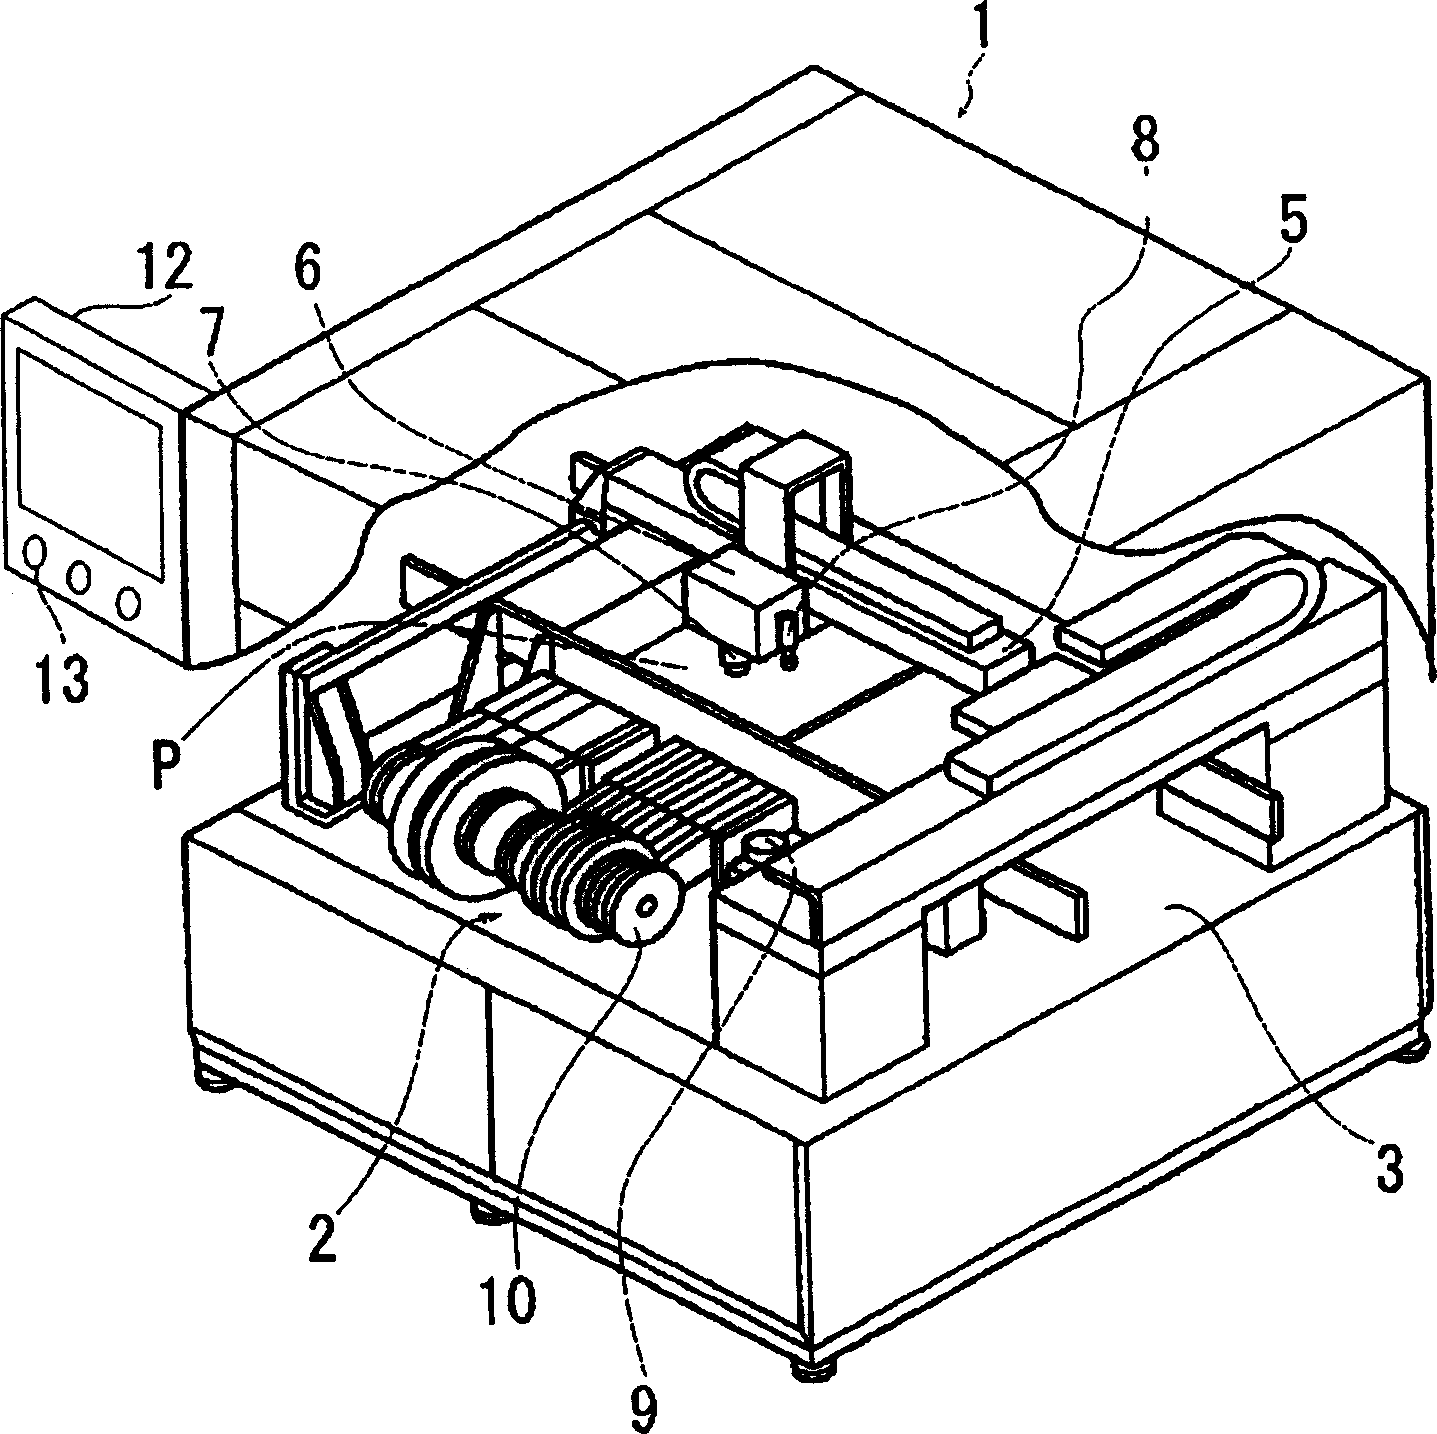 Adsorption position corrector of electronic device in electronic device mounting machine